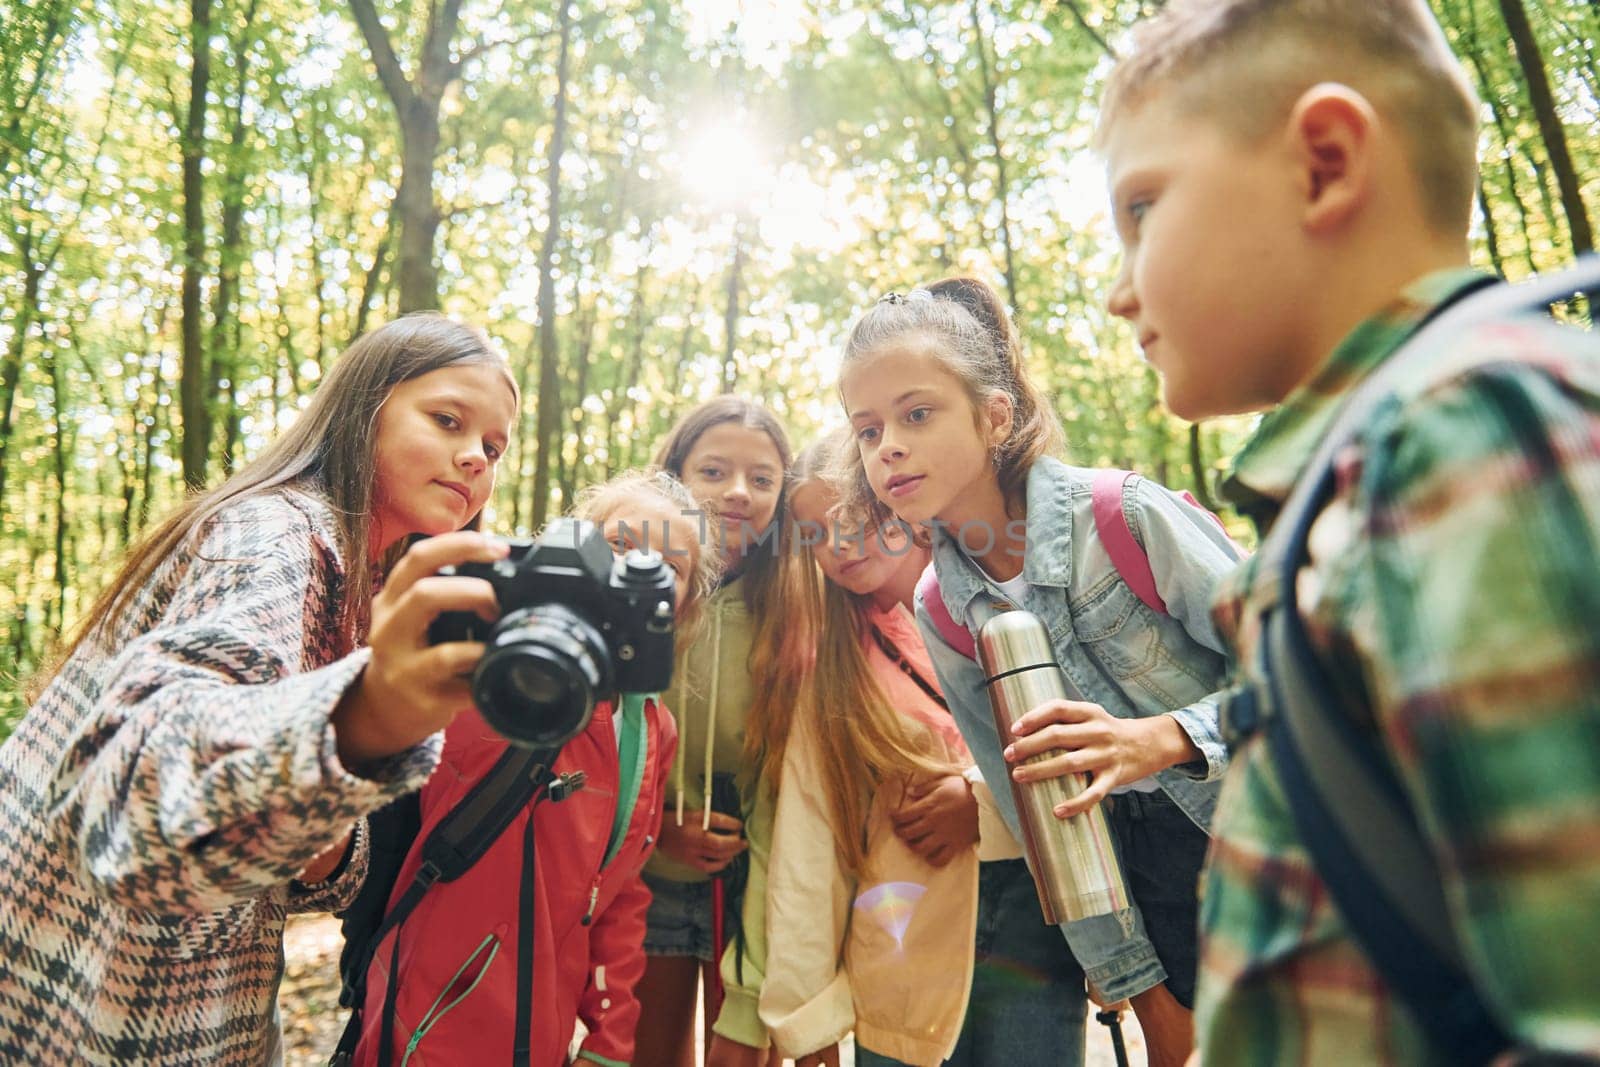 Holding camera. Kids in green forest at summer daytime together by Standret